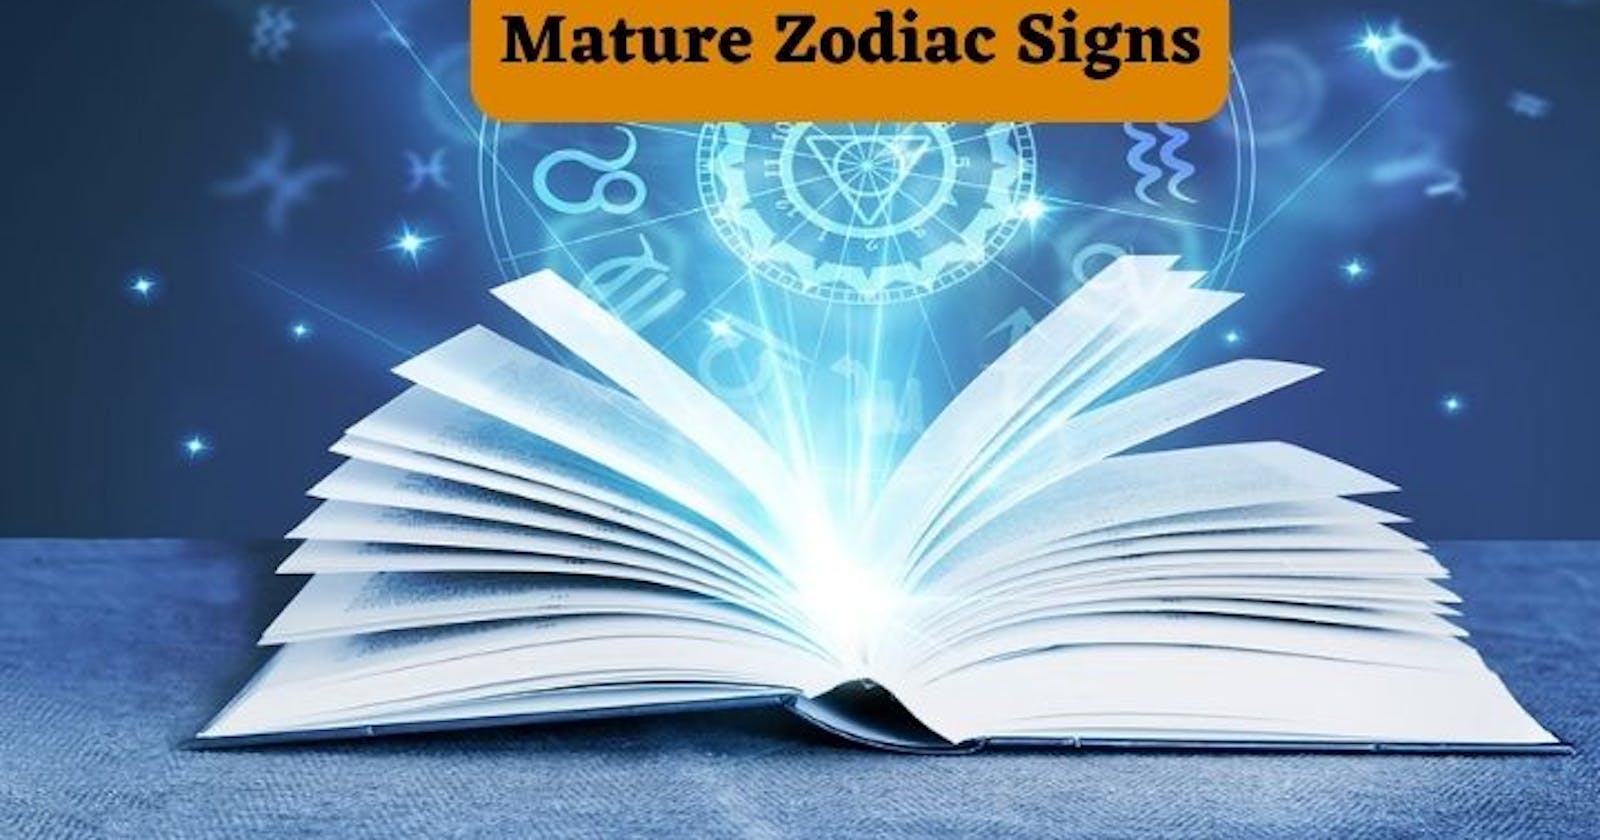 Do you know the most mature zodiac signs?